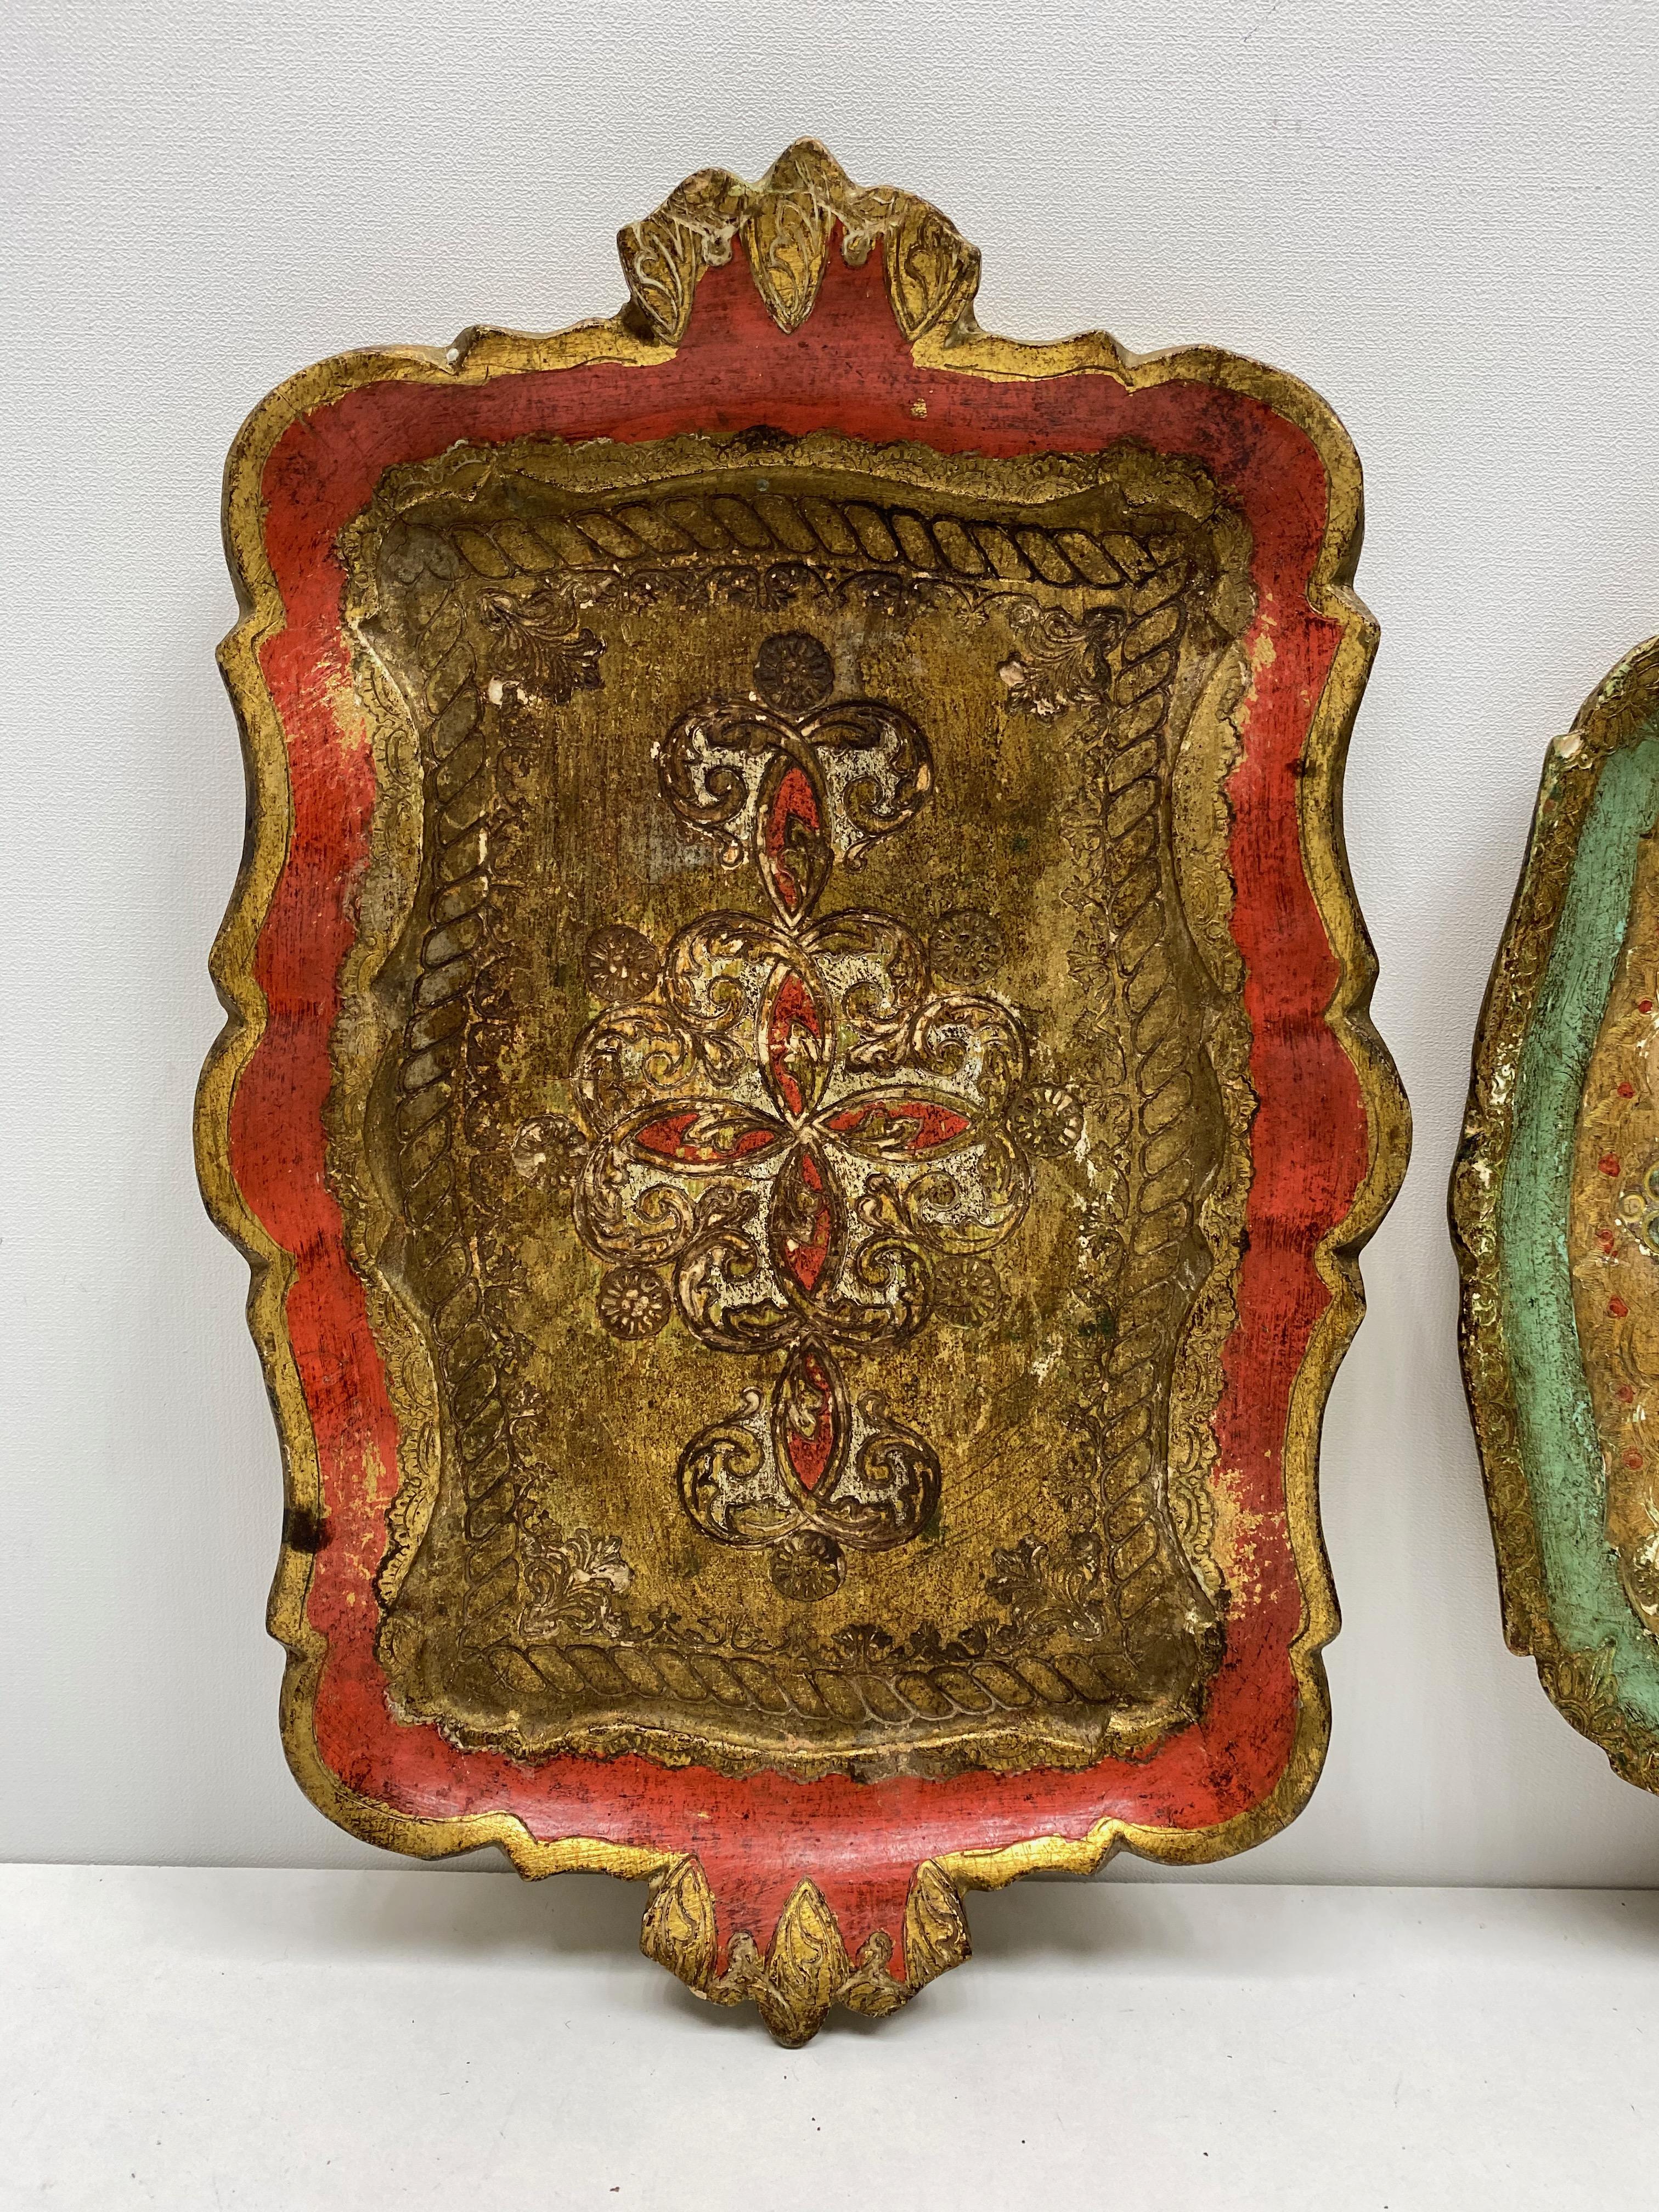 Offered is a set of two absolutely stunning, 1960s Italian giltwood petite serving trays. Minor patina and paint lost gives this pieces a classy statement. The red one measures approx. 1.25